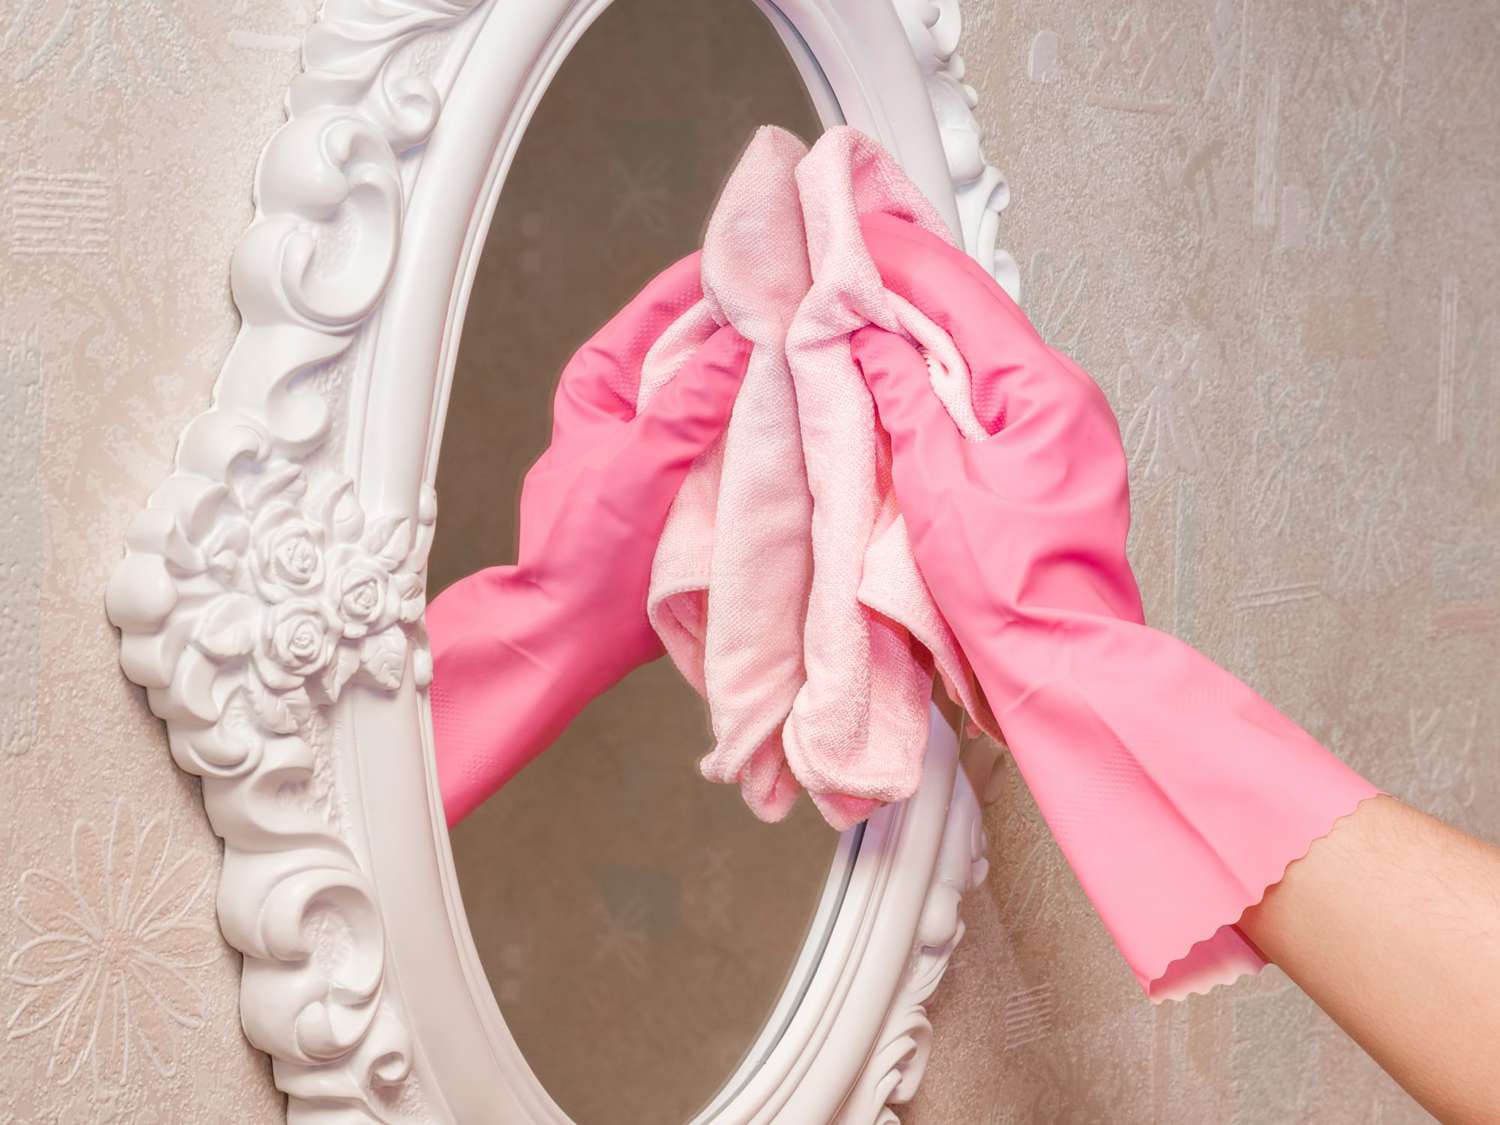 Best Products To Clean Your Mirrors Effectively